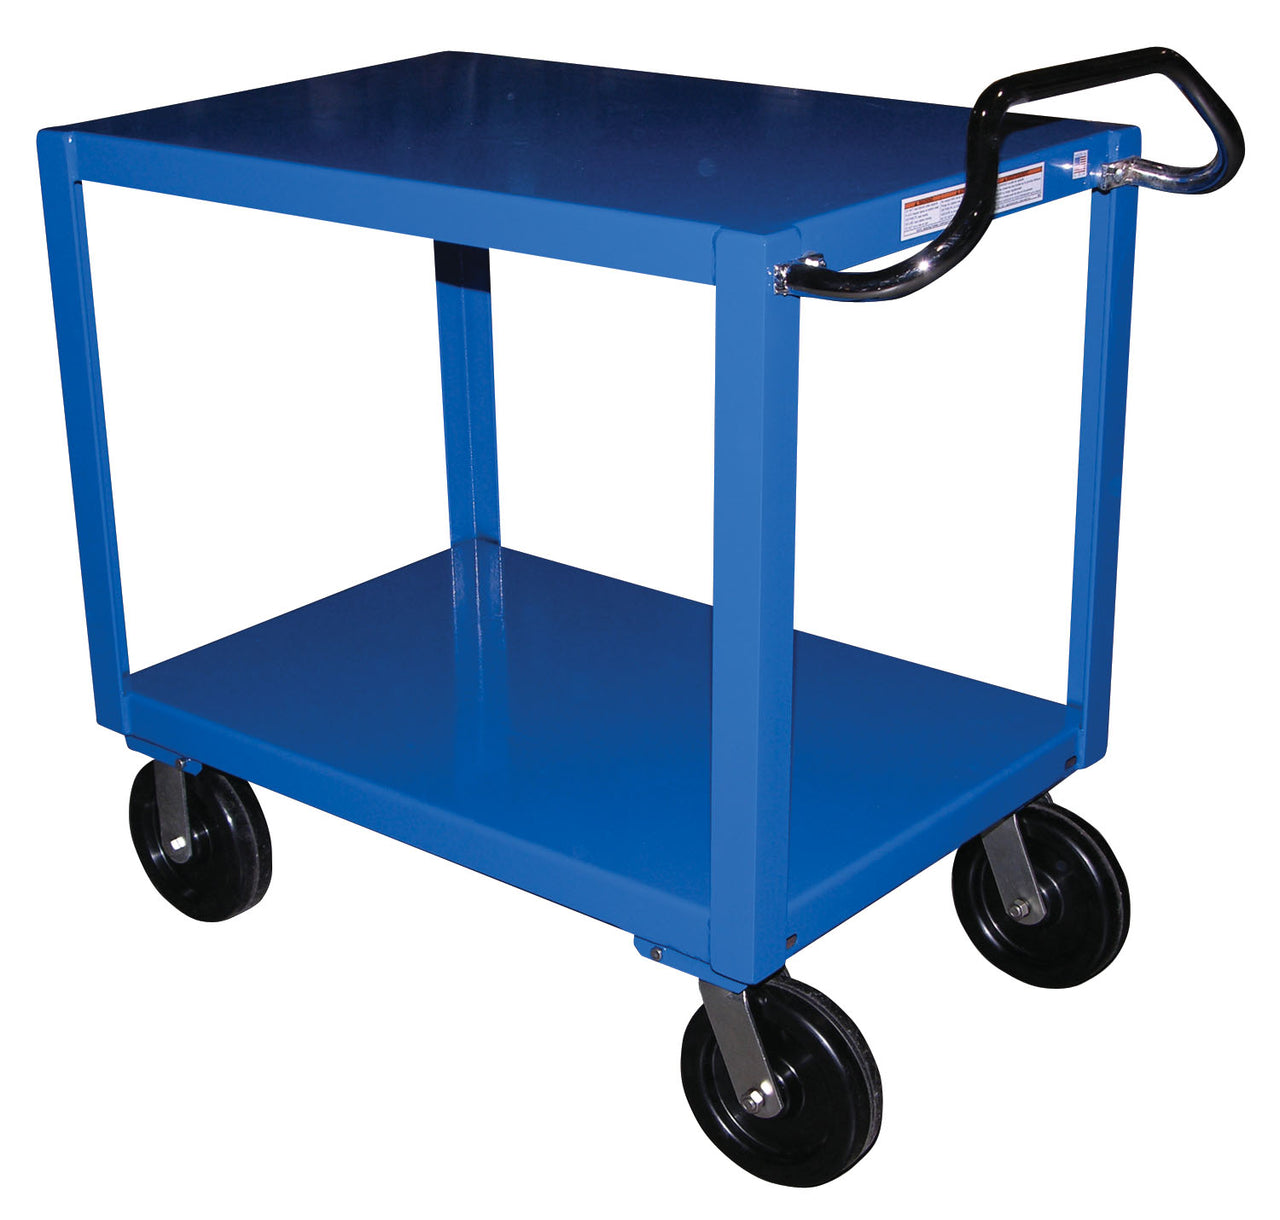 24" x 36" Ergo-Handle Cart w/ Mold-on-Rubber Casters